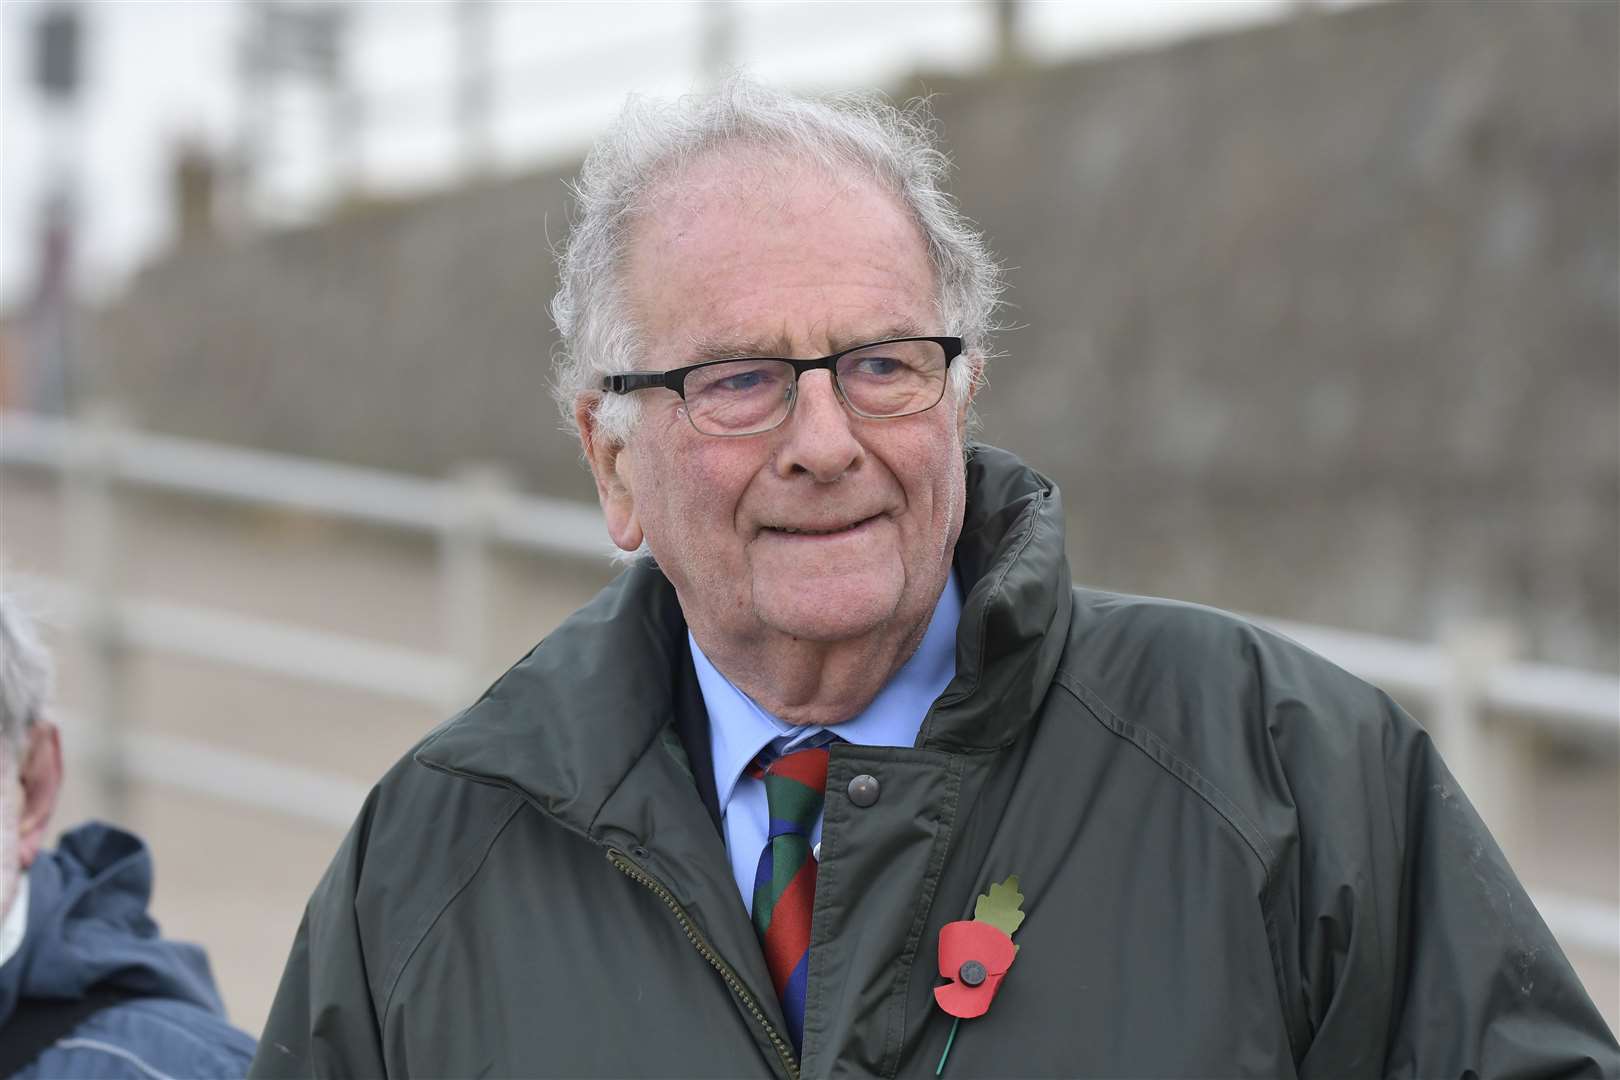 Sir Roger Gale is the Conservative candidate in Herne Bay